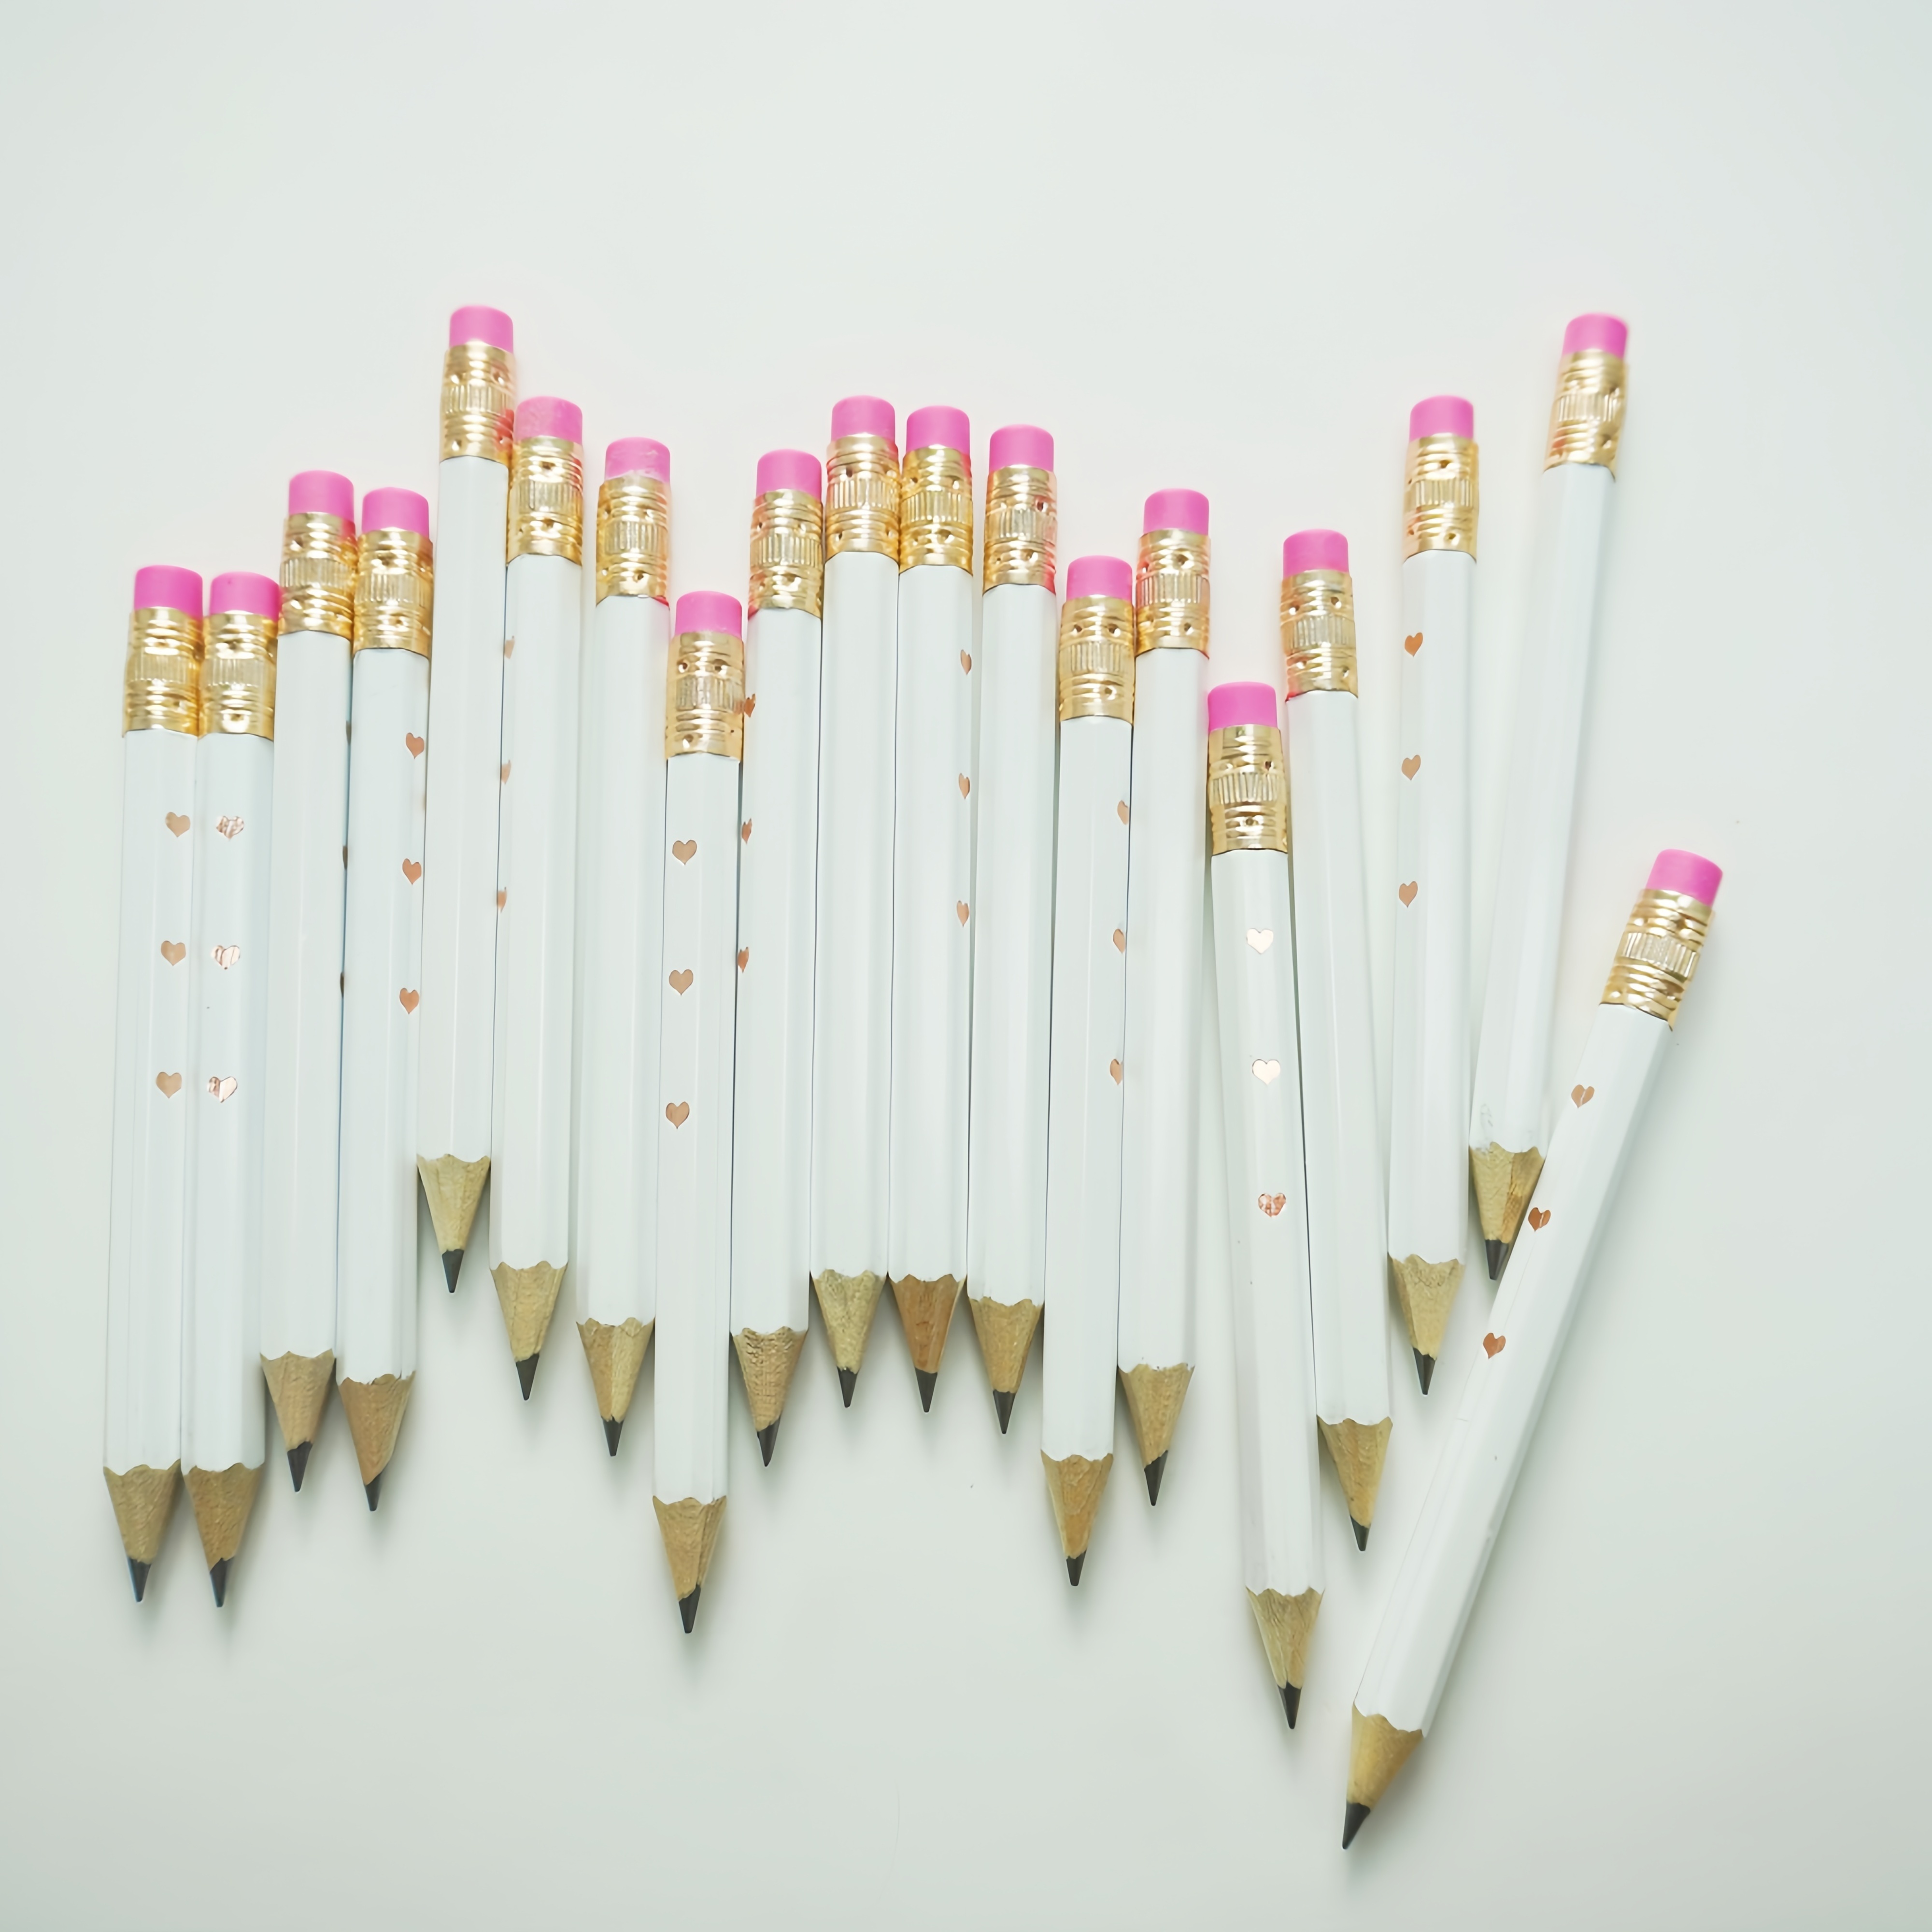 

Elegant Rose Golden Mini Pencils - 20/10 Piece | Perfect For Party Favors, Bridal Showers & Games | Durable Wood, 2mm Lead | For Ages 14+